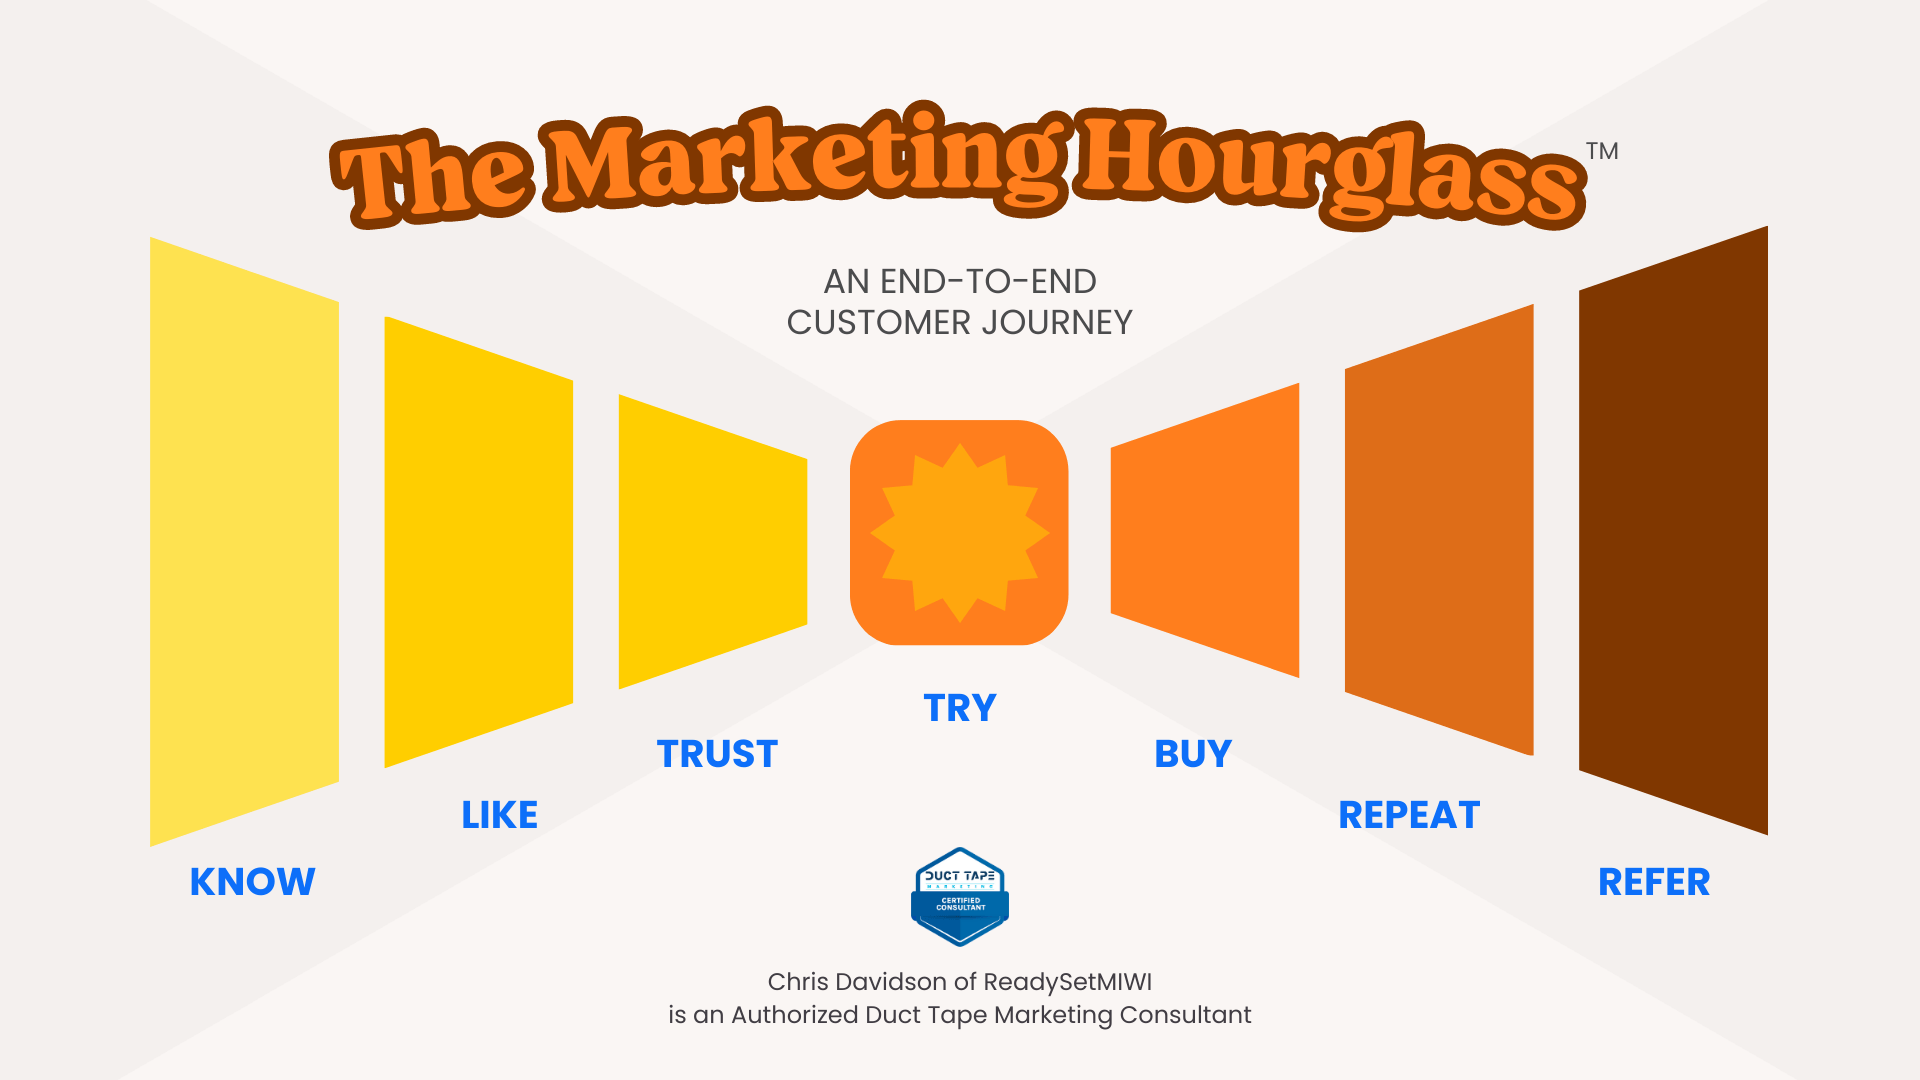 The Marketing Hourglass is an end-to-end customer journey.